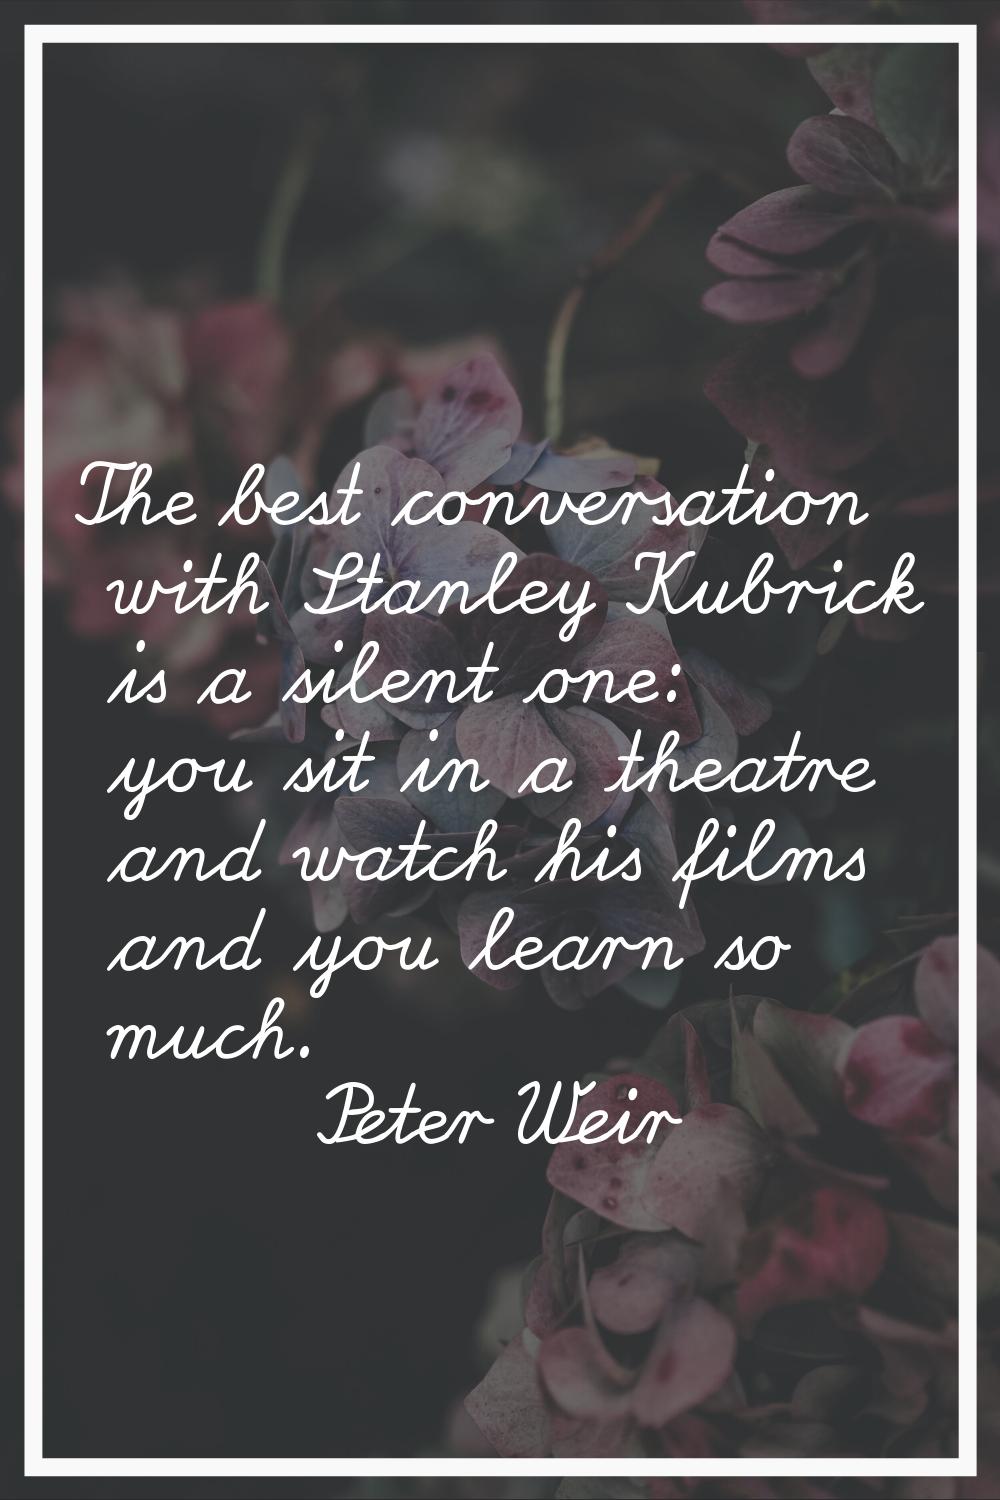 The best conversation with Stanley Kubrick is a silent one: you sit in a theatre and watch his film